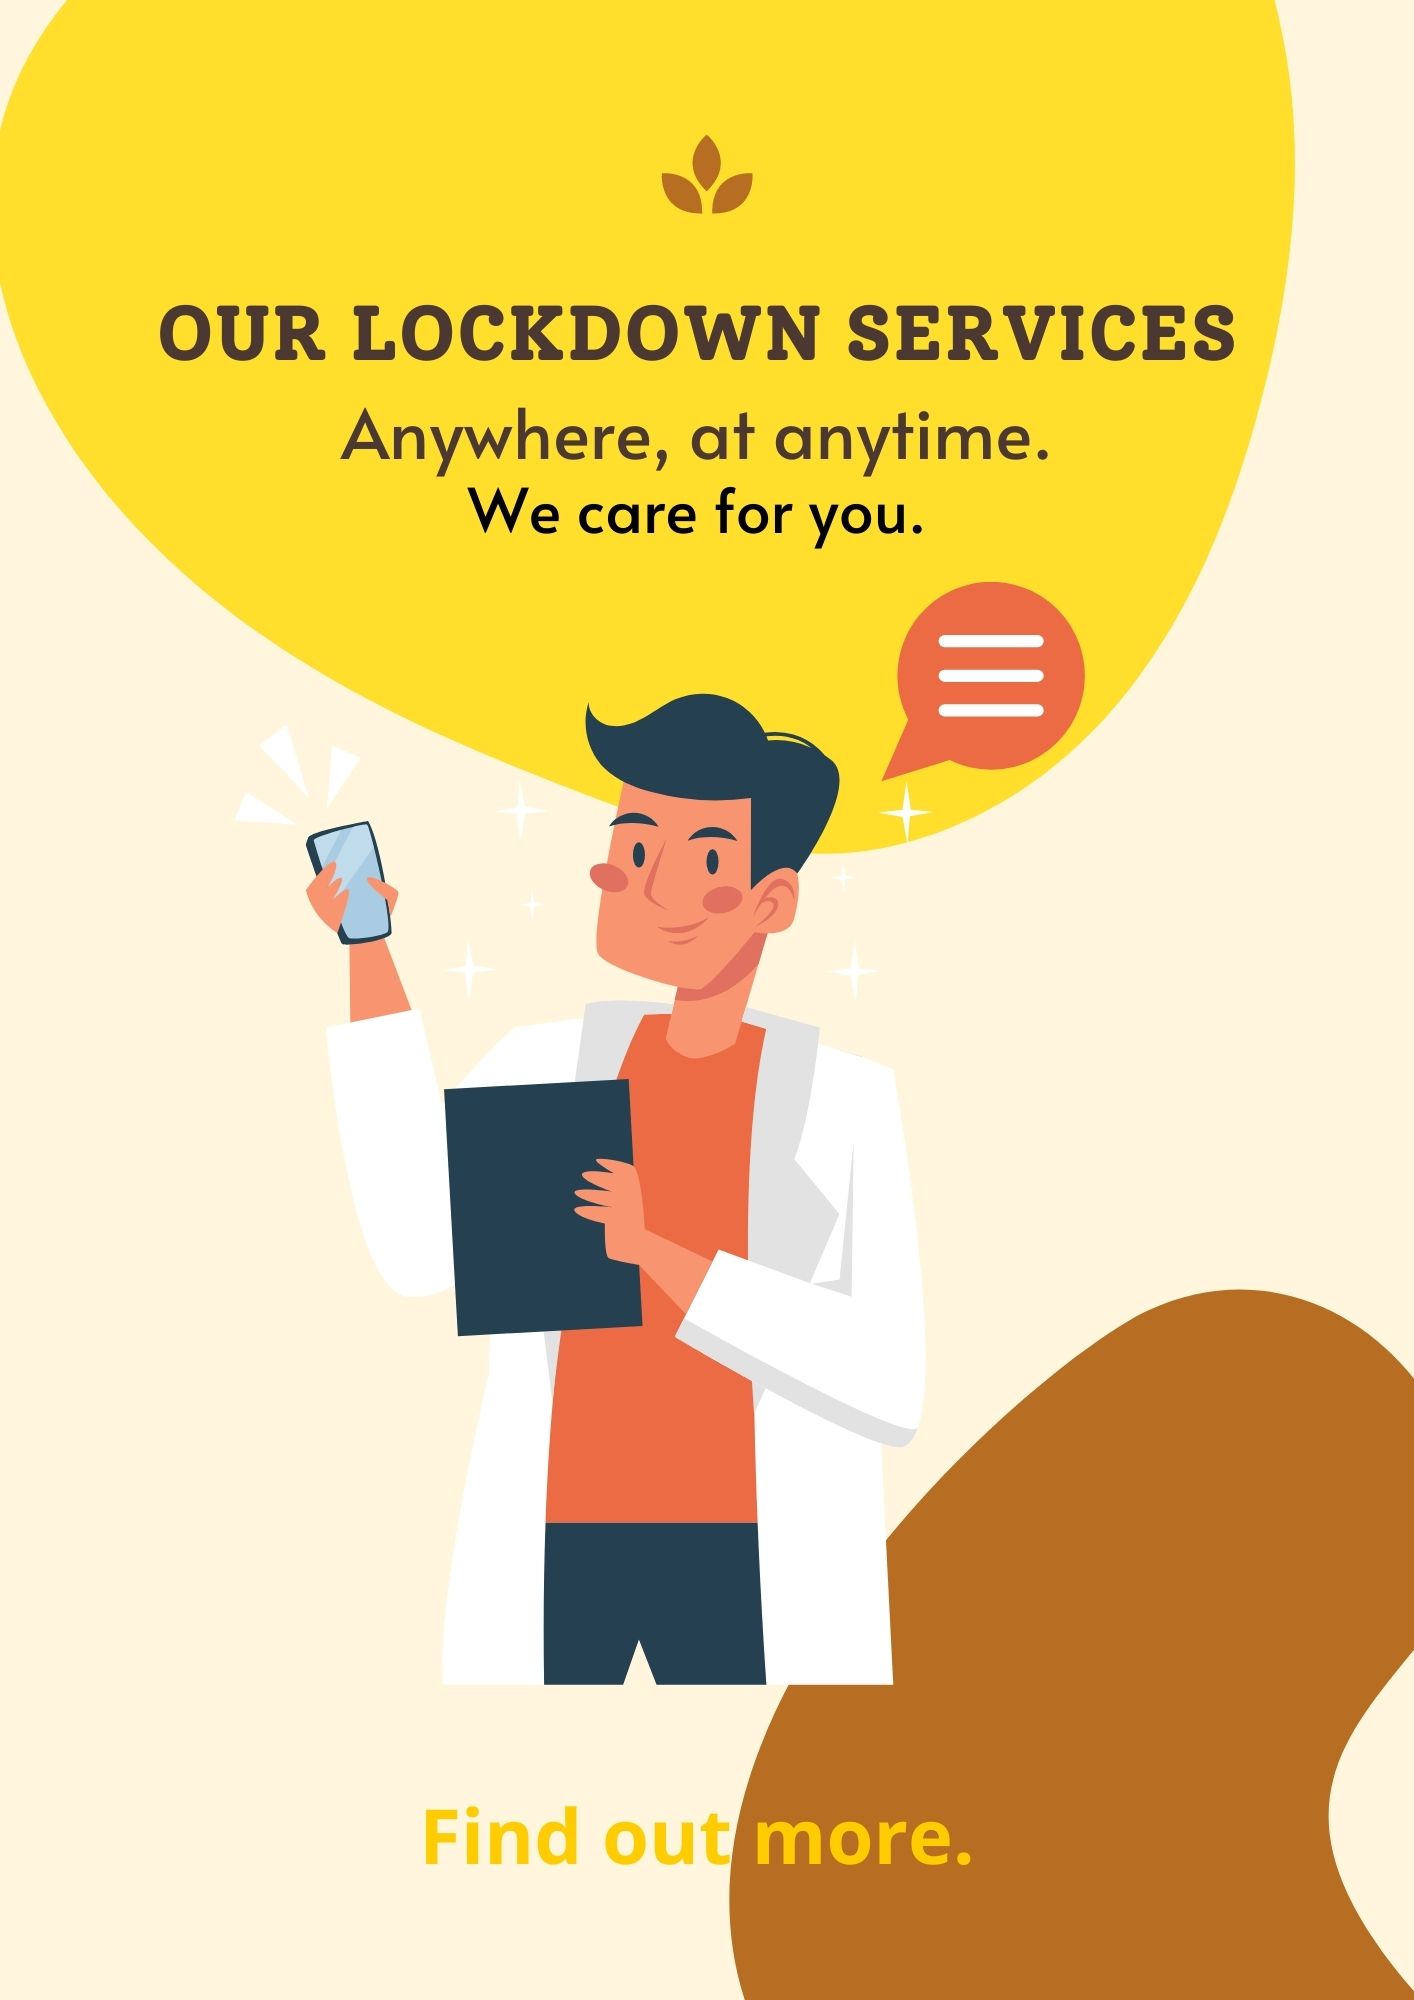 Brochure showcasing online health consultation and treatment services during lockdown